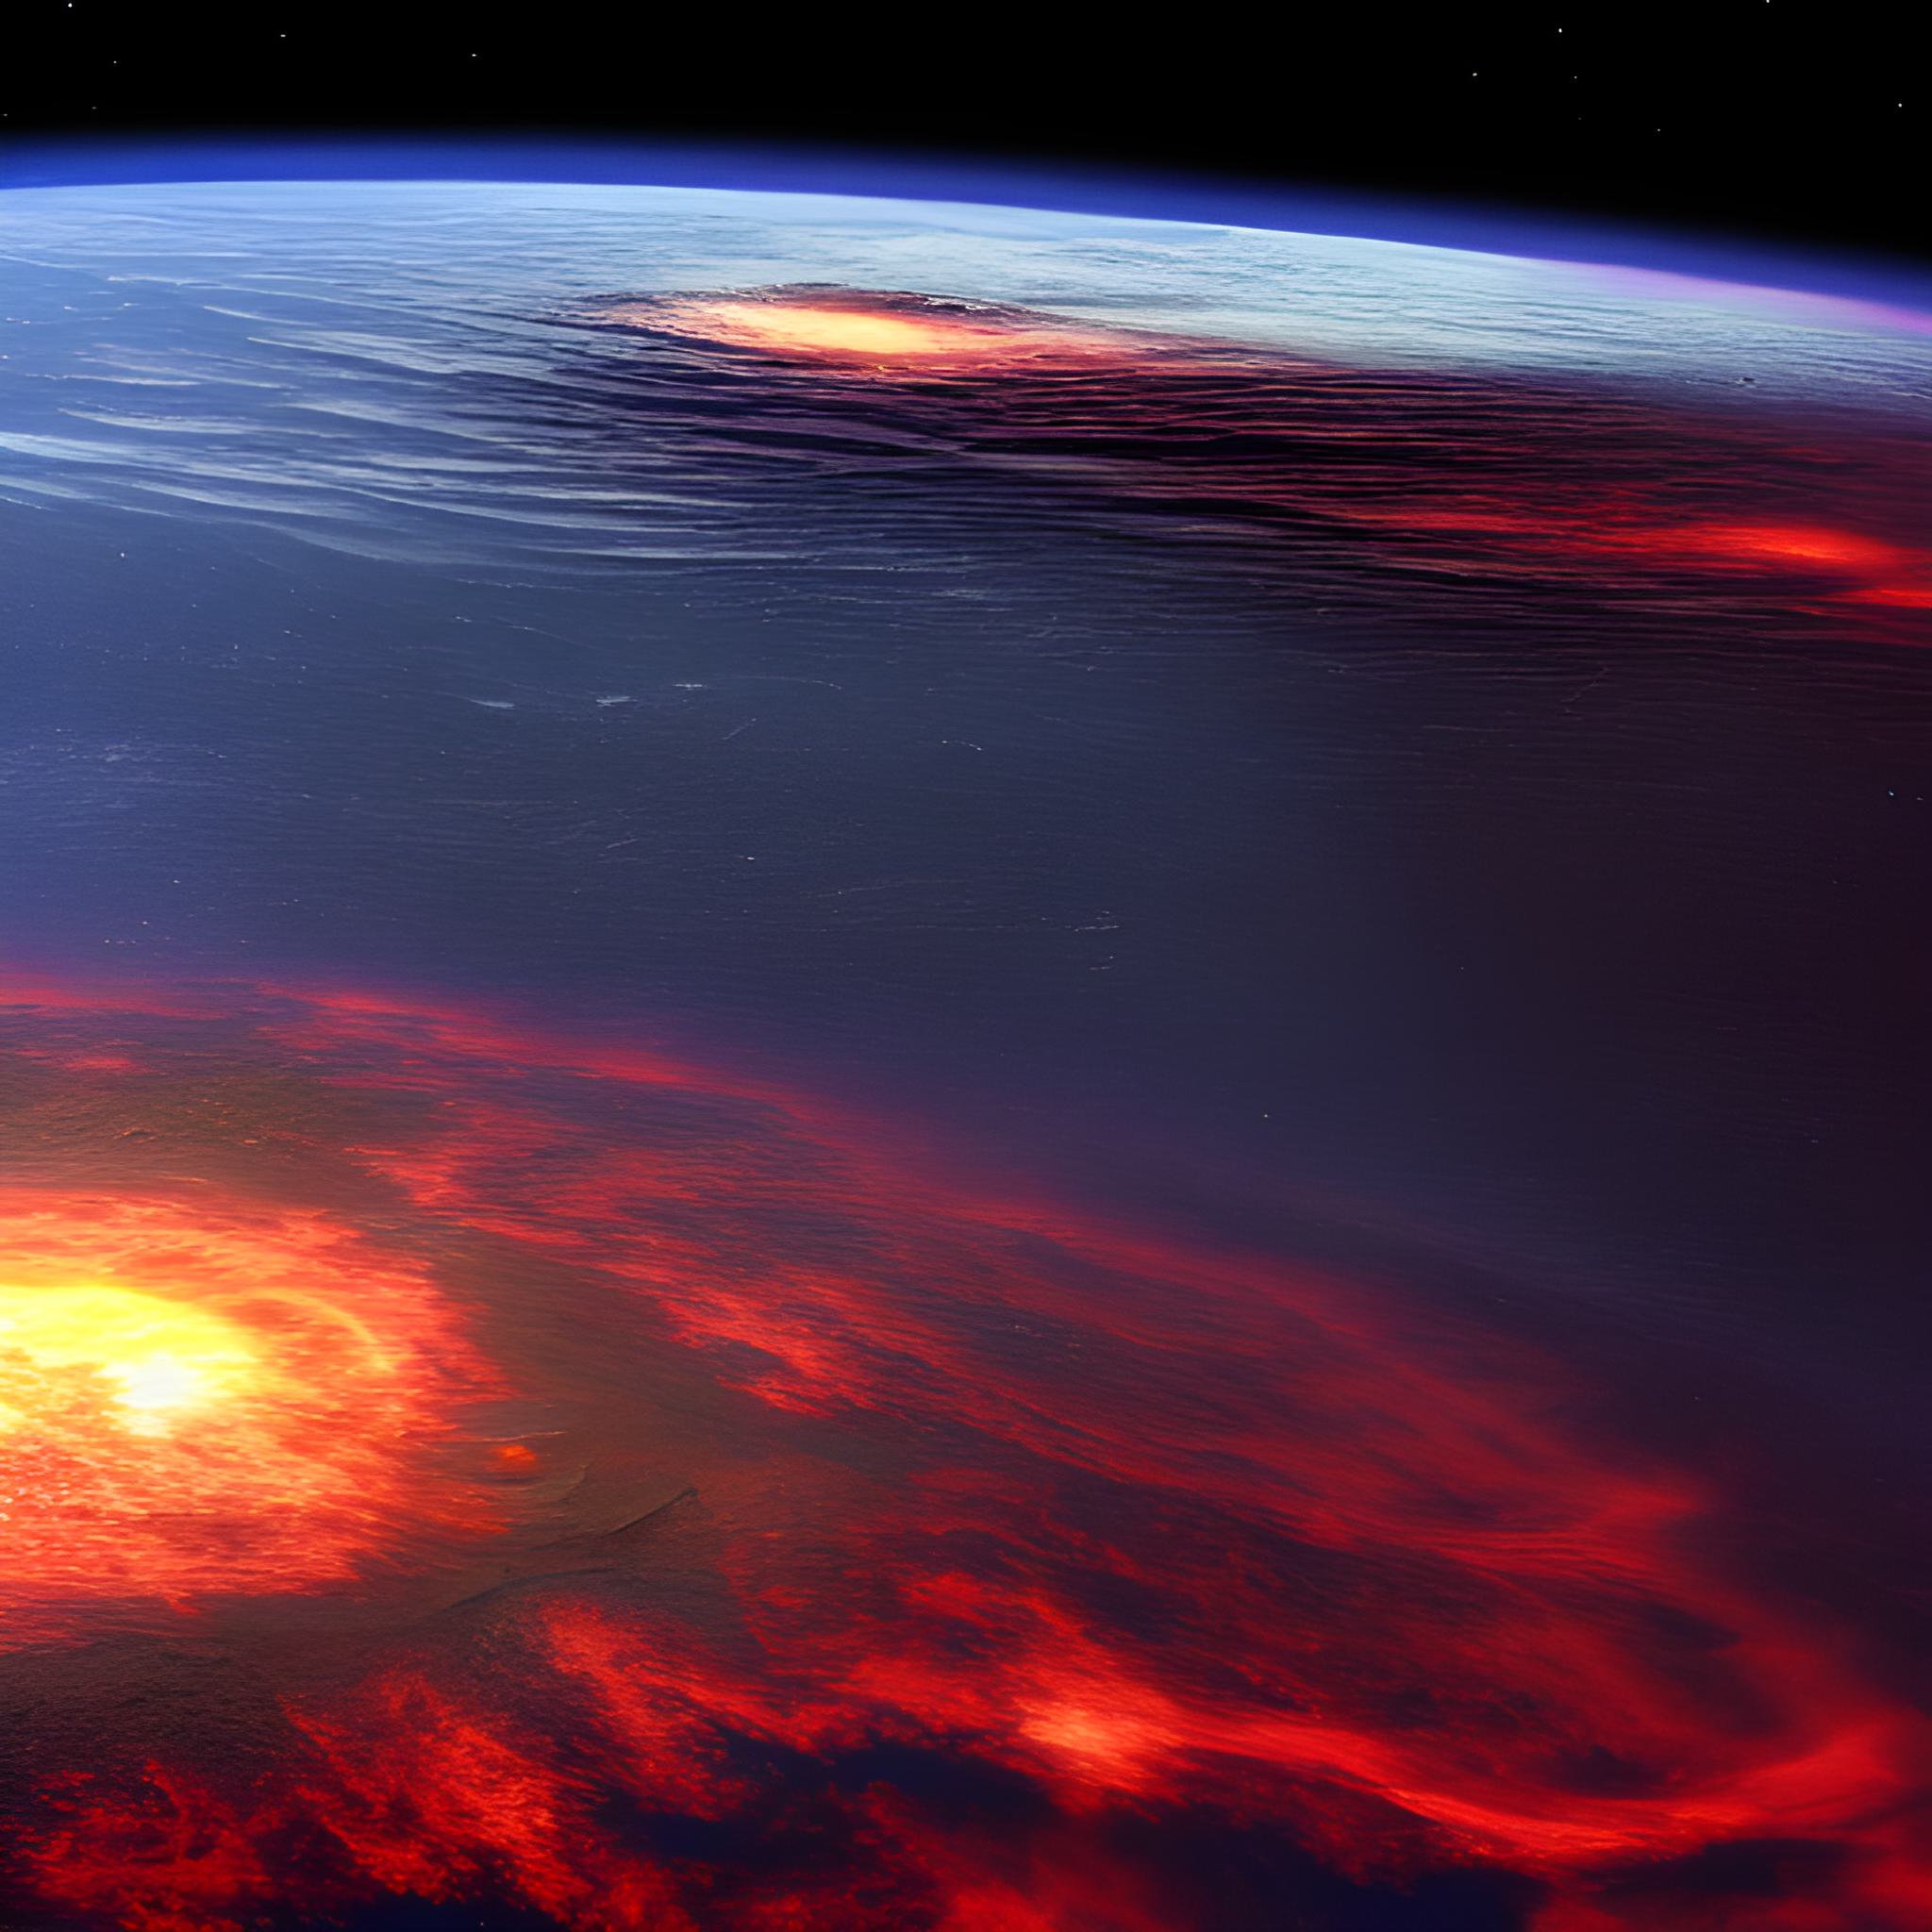 Picture showing two massive explosions on the surface of a planet viewed from orbit